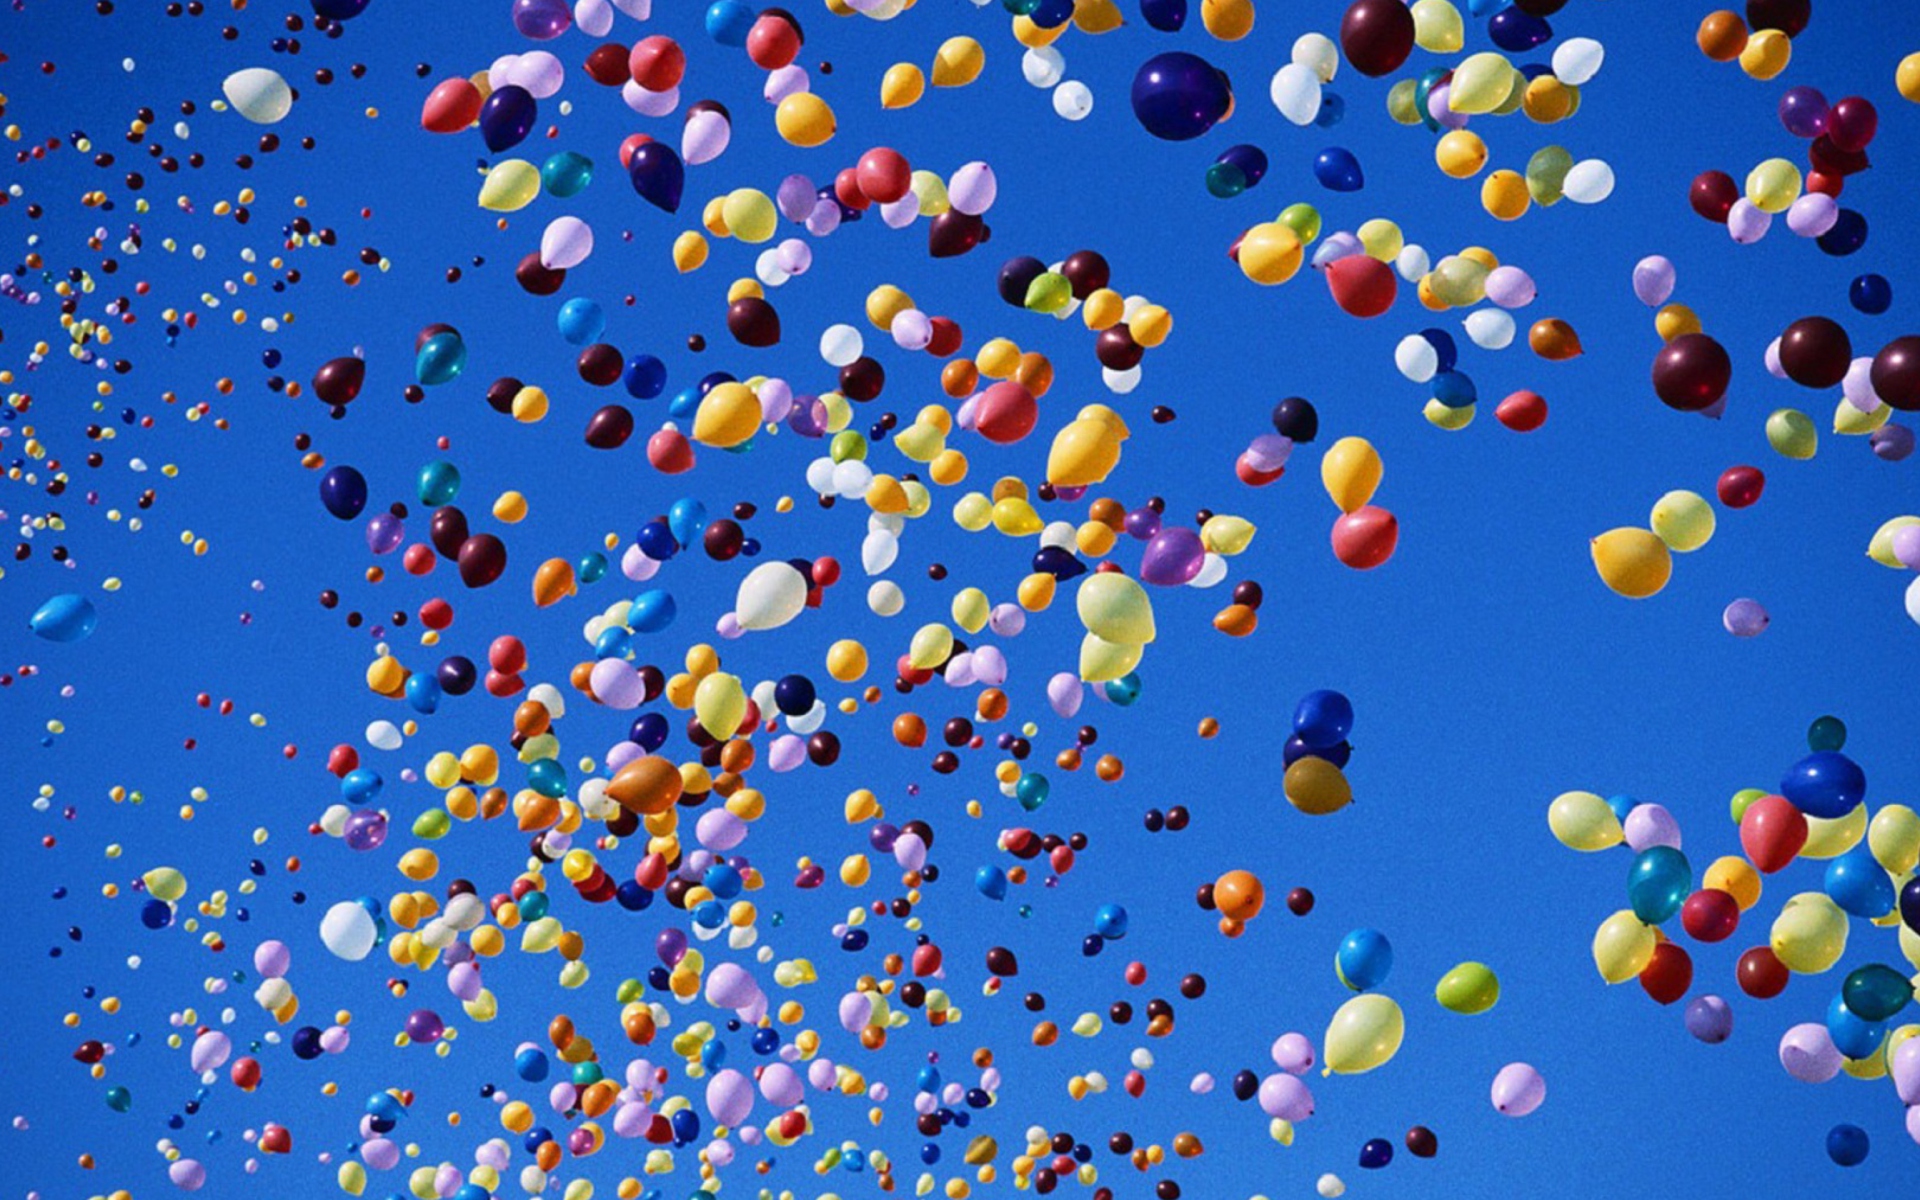 Colorful Balloons In Blue Sky screenshot #1 1920x1200